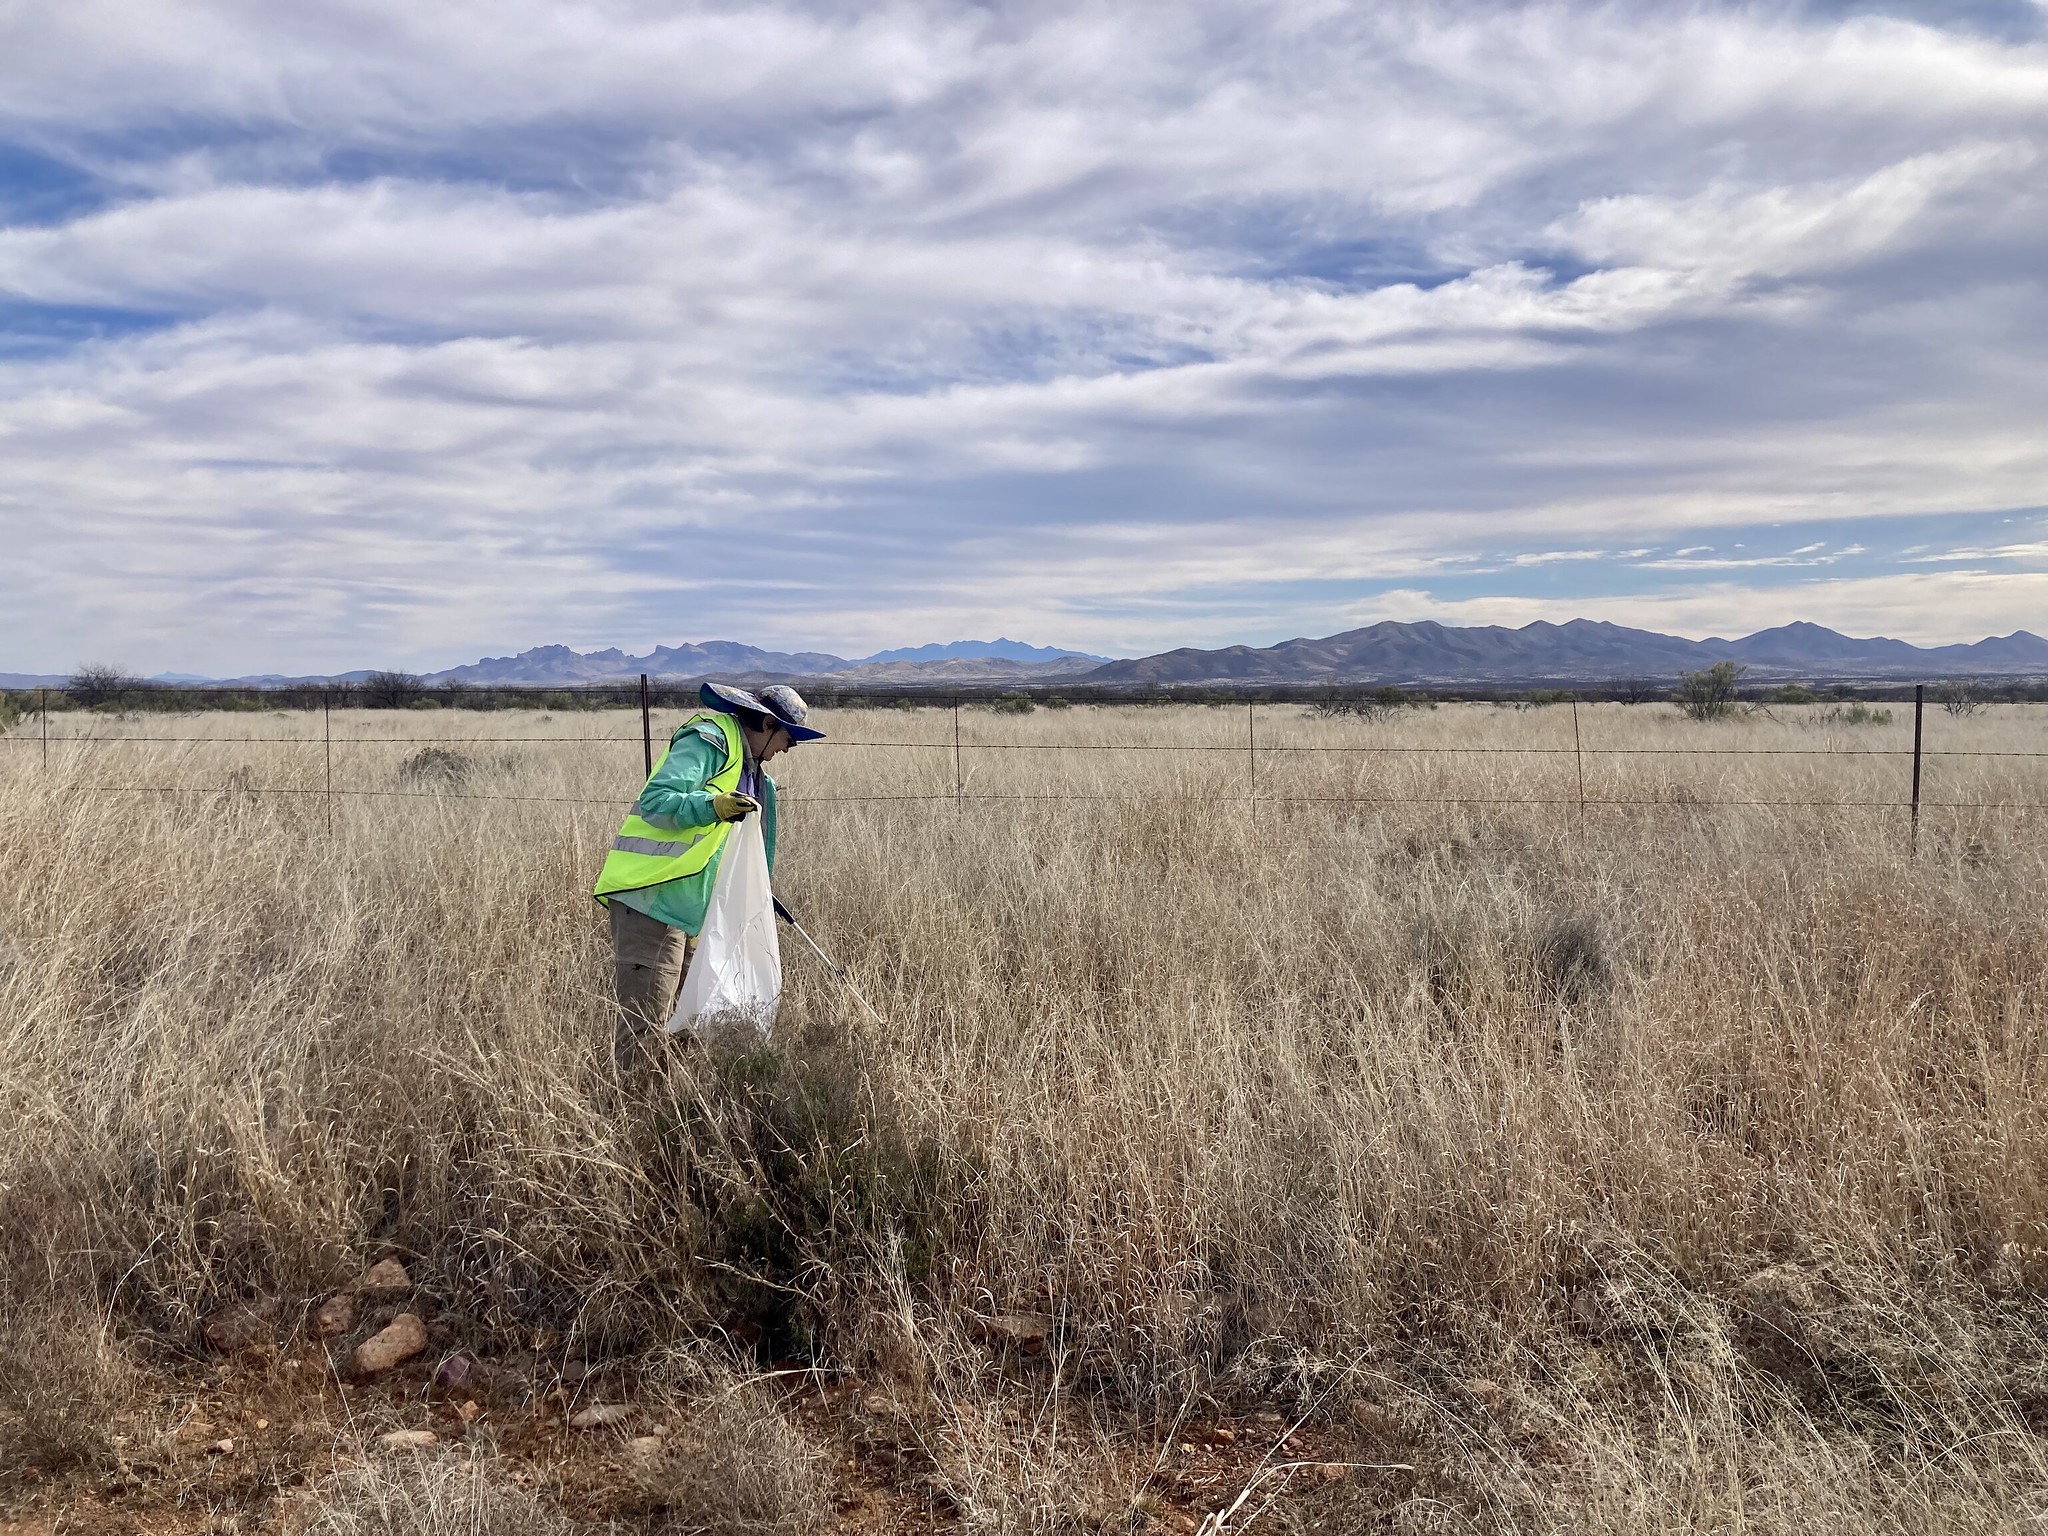 A woman removes litter from a highway shoulder in a rural, desert area with mountains in the distant background.